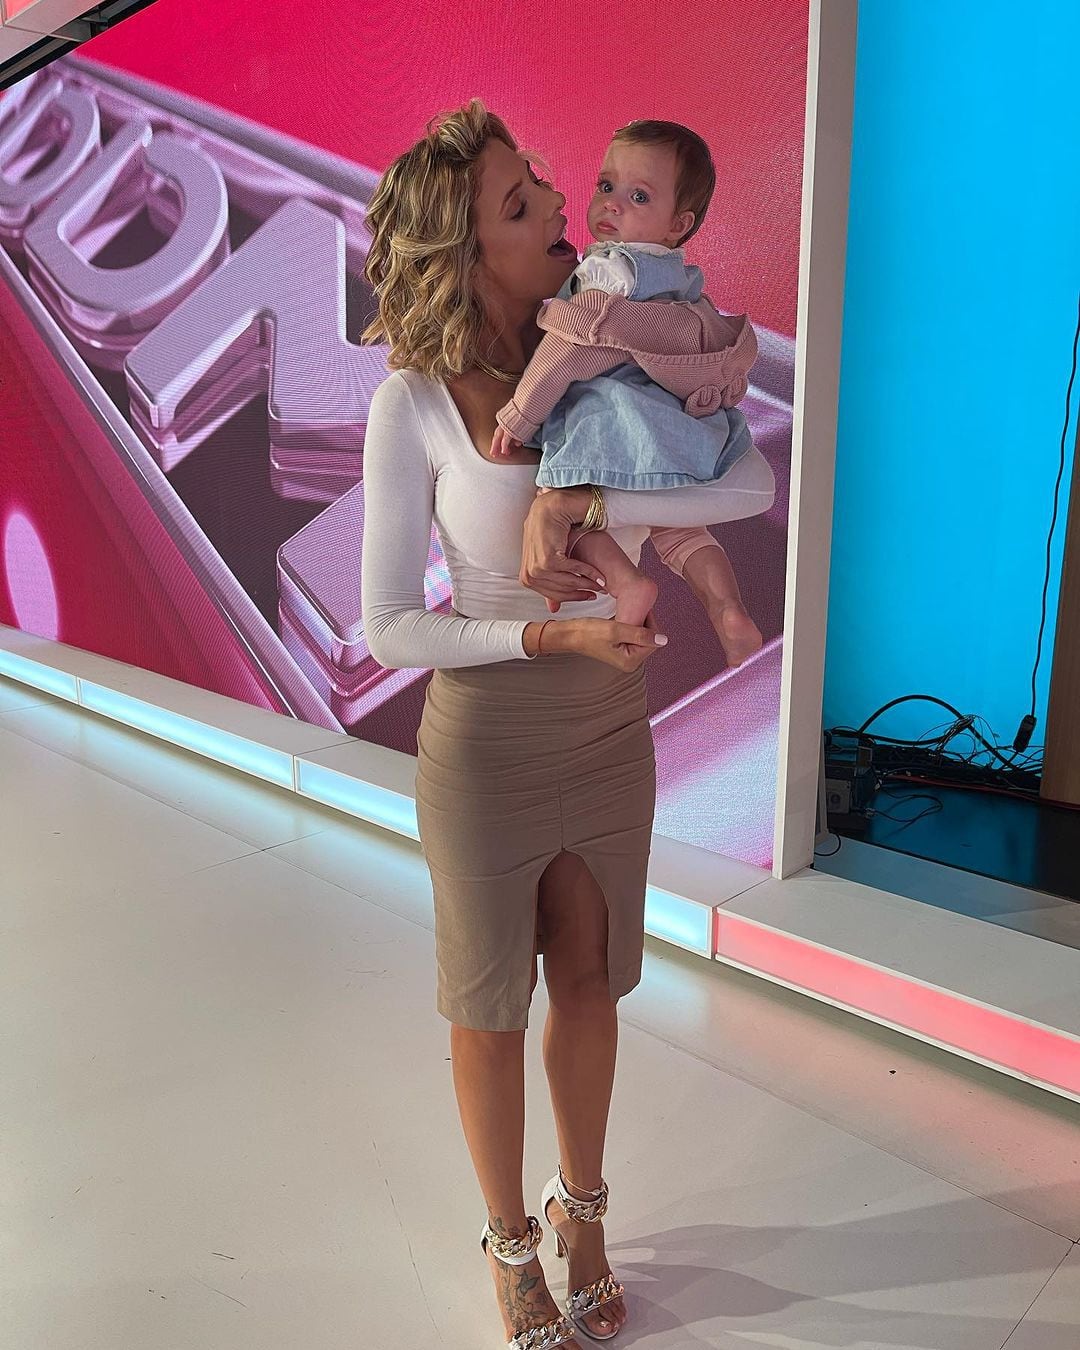 Tamara Bella and her 9-month-old baby